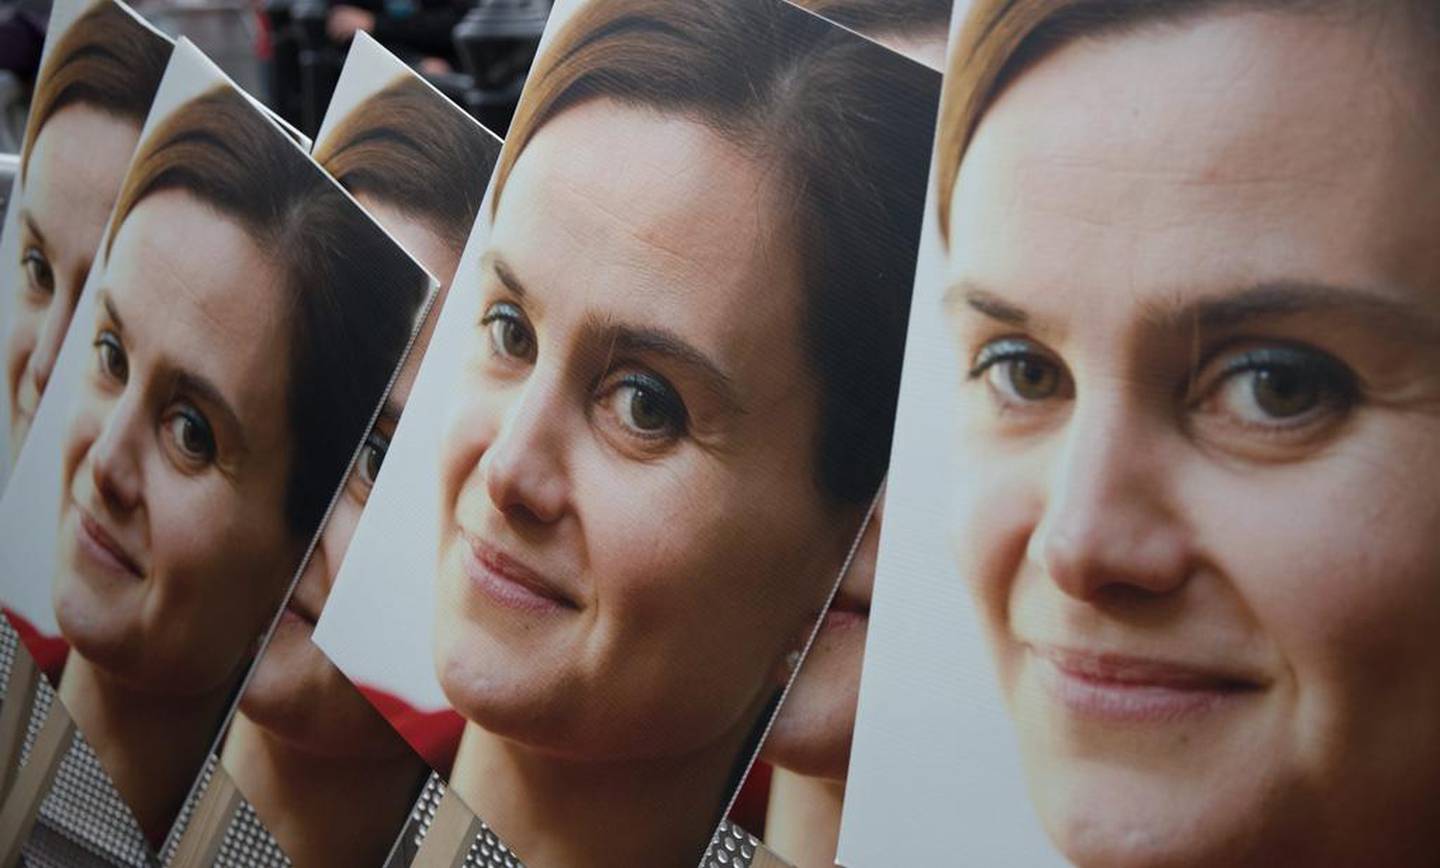 Poster boards showing a photograph of Jo Cox are seen during a memorial event for the murdered Labour MP (Photo by Matt Cardy/Getty Images)